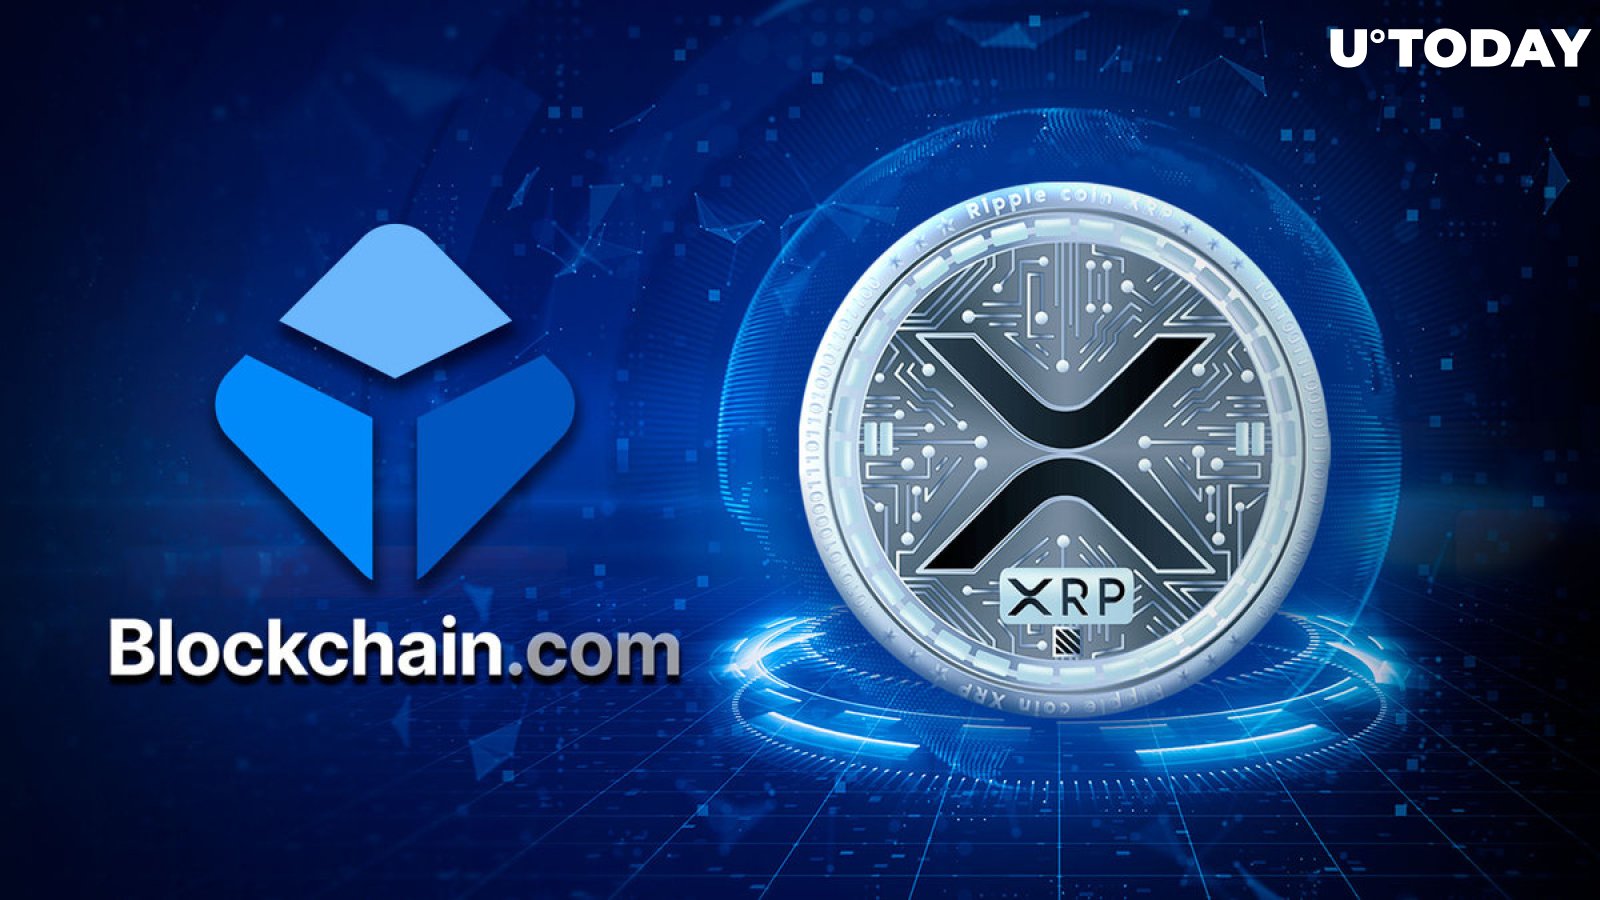 XRP Officially Listed by Blockchain.com: Details Inside